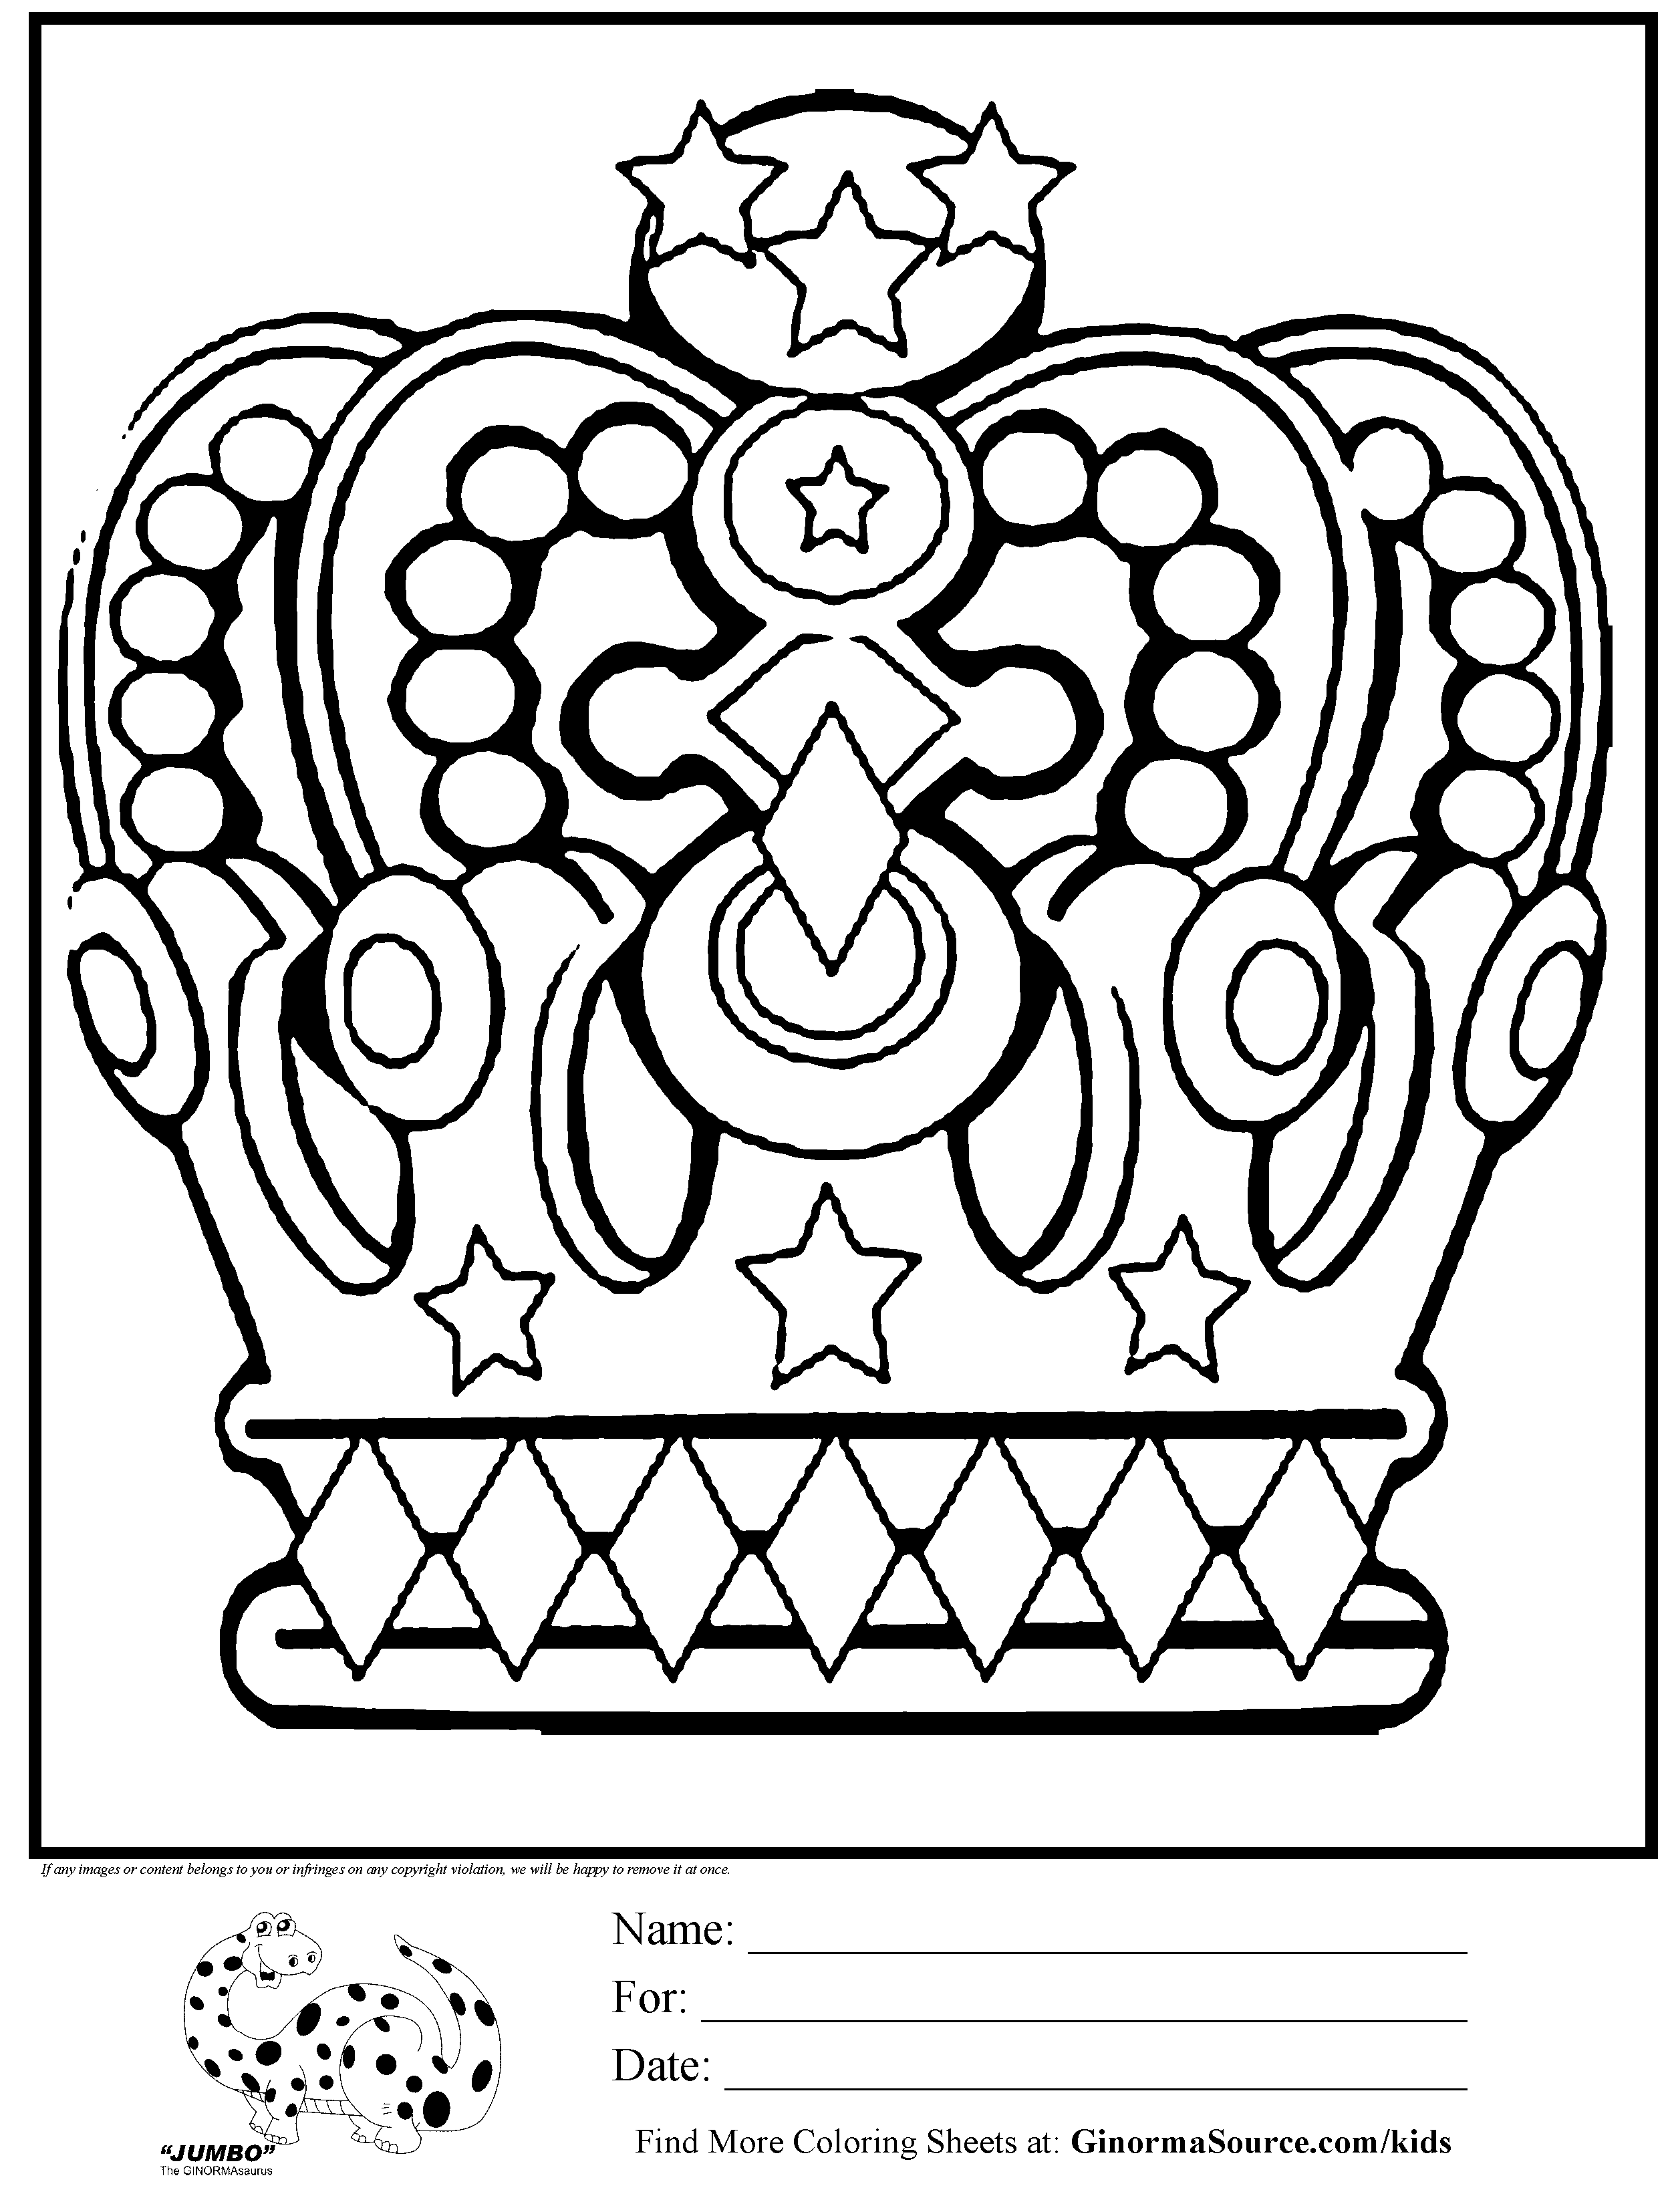 Coloring Page Crown Coloring Pages Descendants Coloring Pages Crown Template